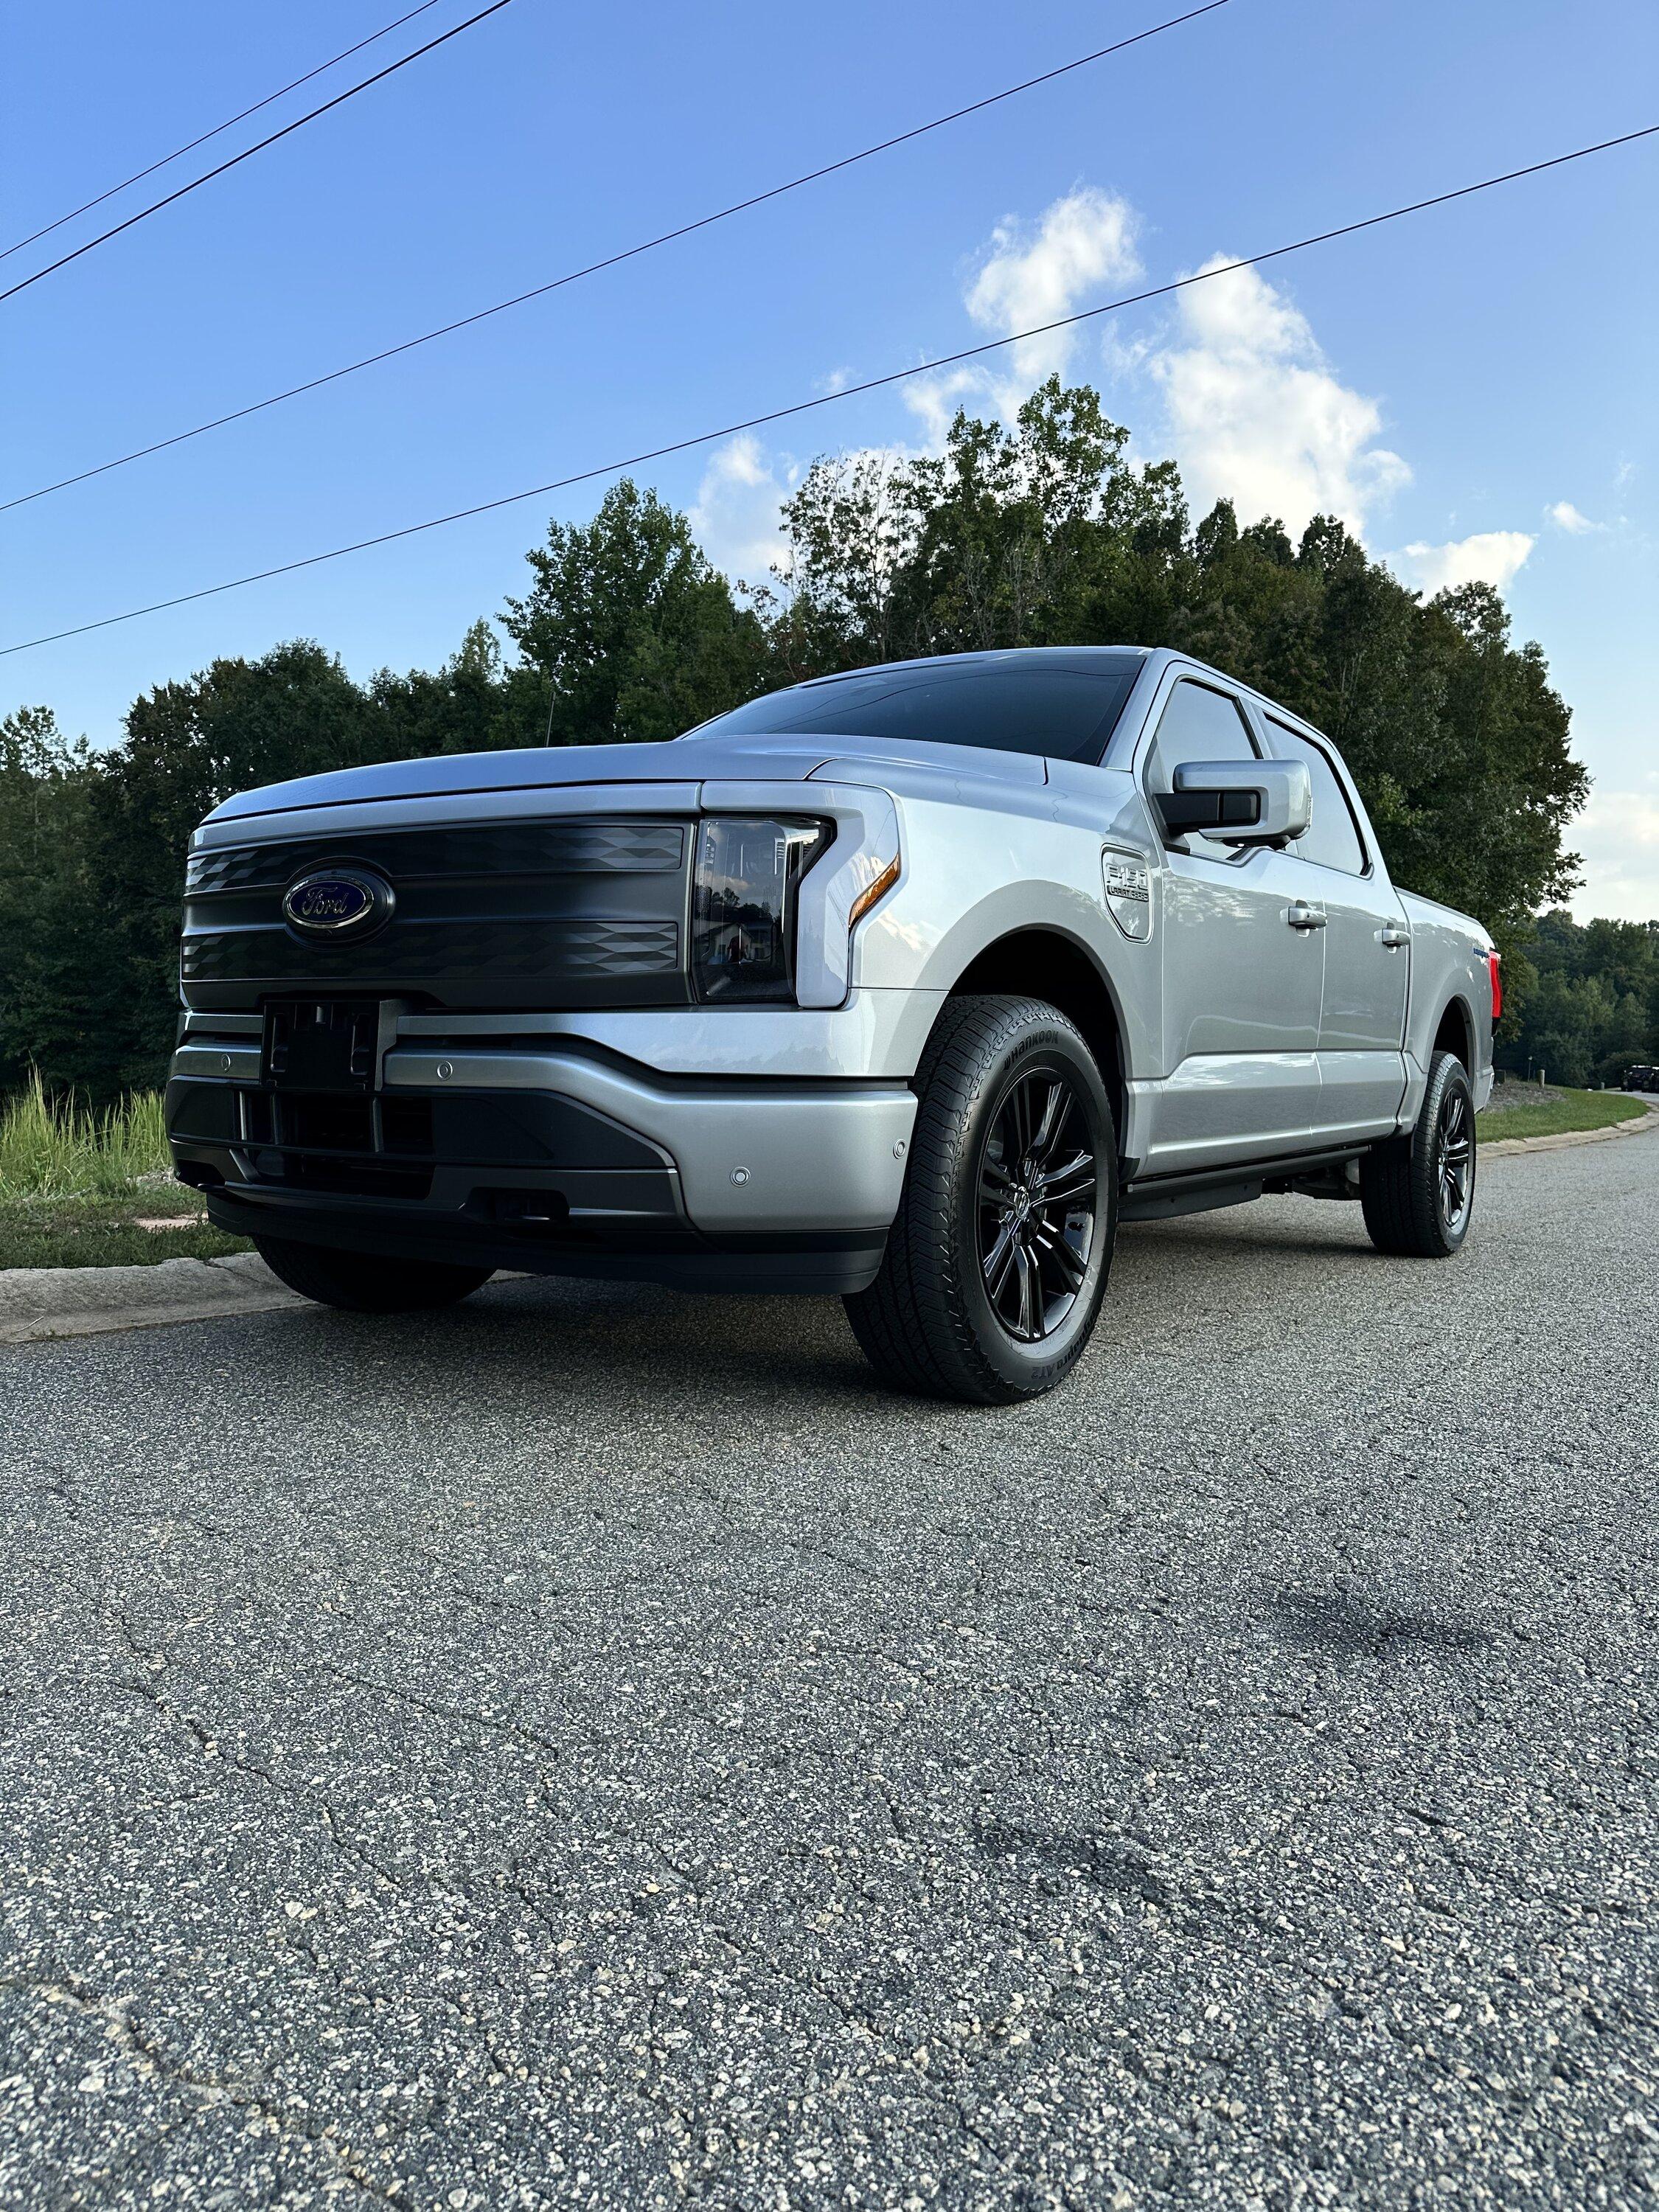 Ford F-150 Lightning Gloss black 20" wheels on my Lightning Lariat with stock AT tires, tints, AMP Power Steps 50DCF26C-EB04-4419-AD65-0B574300723B